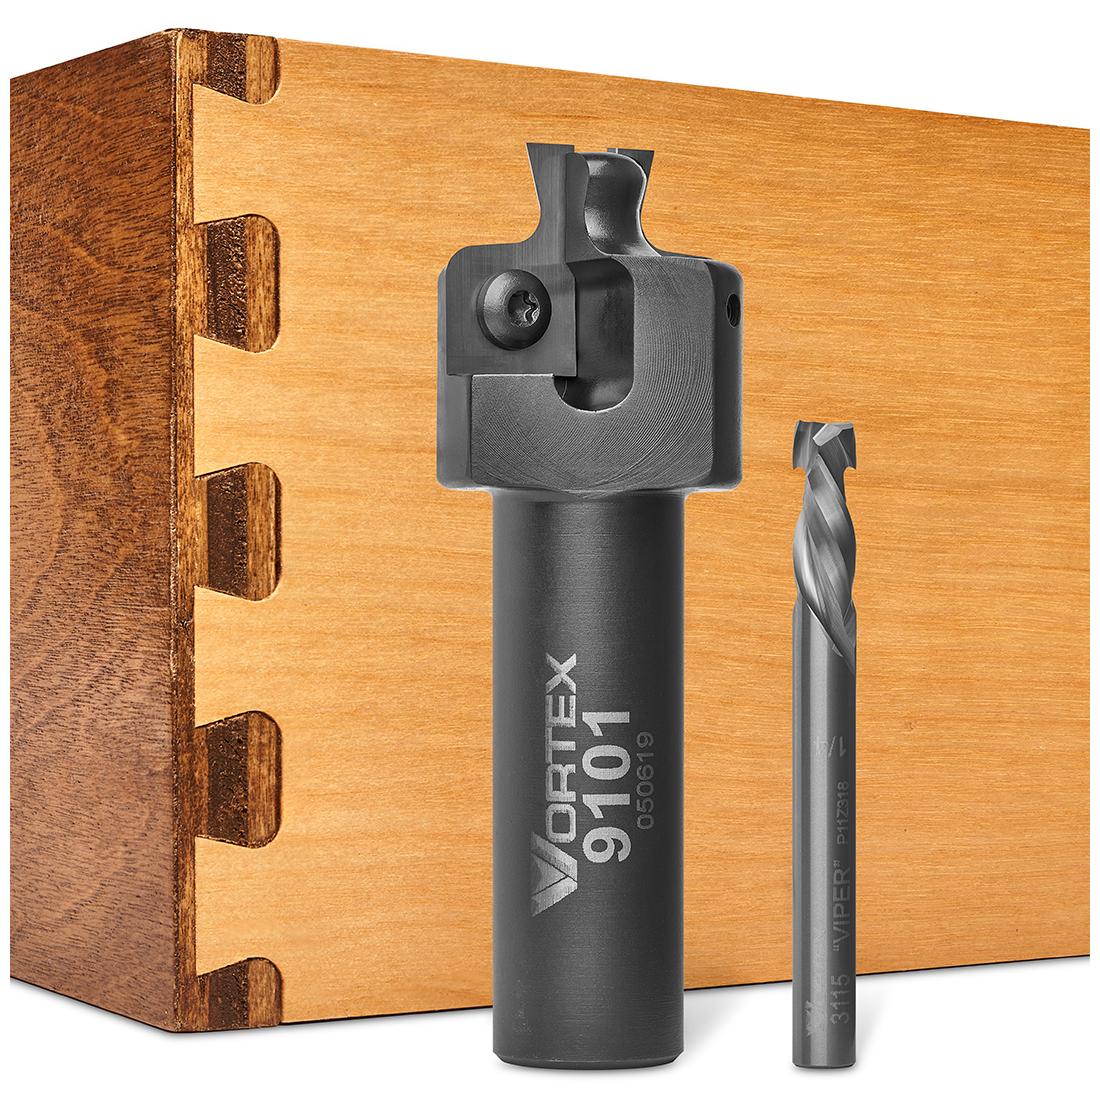 vortex-dovetail-joint-tooling.jpg